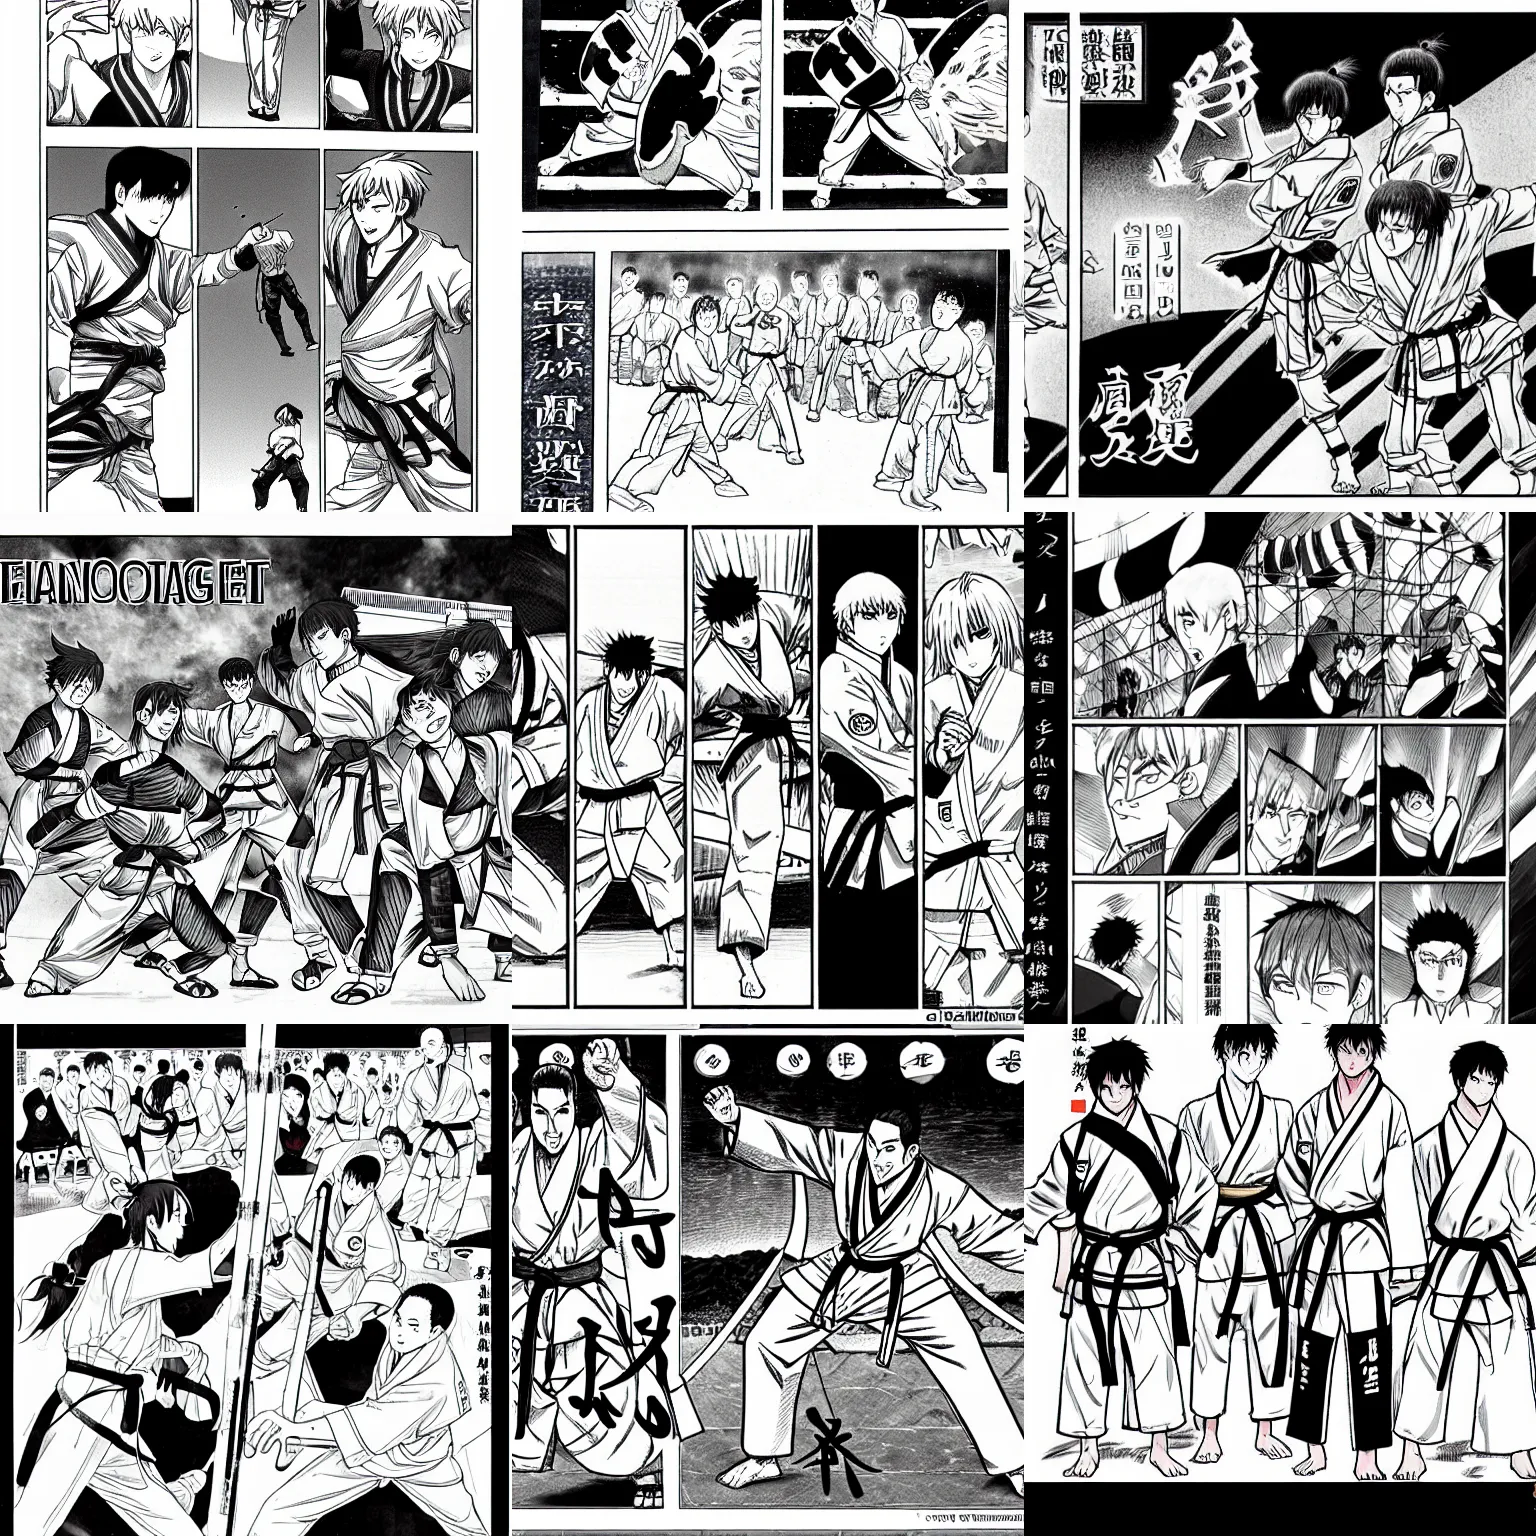 Prompt: manga page depicting martial artists in arena